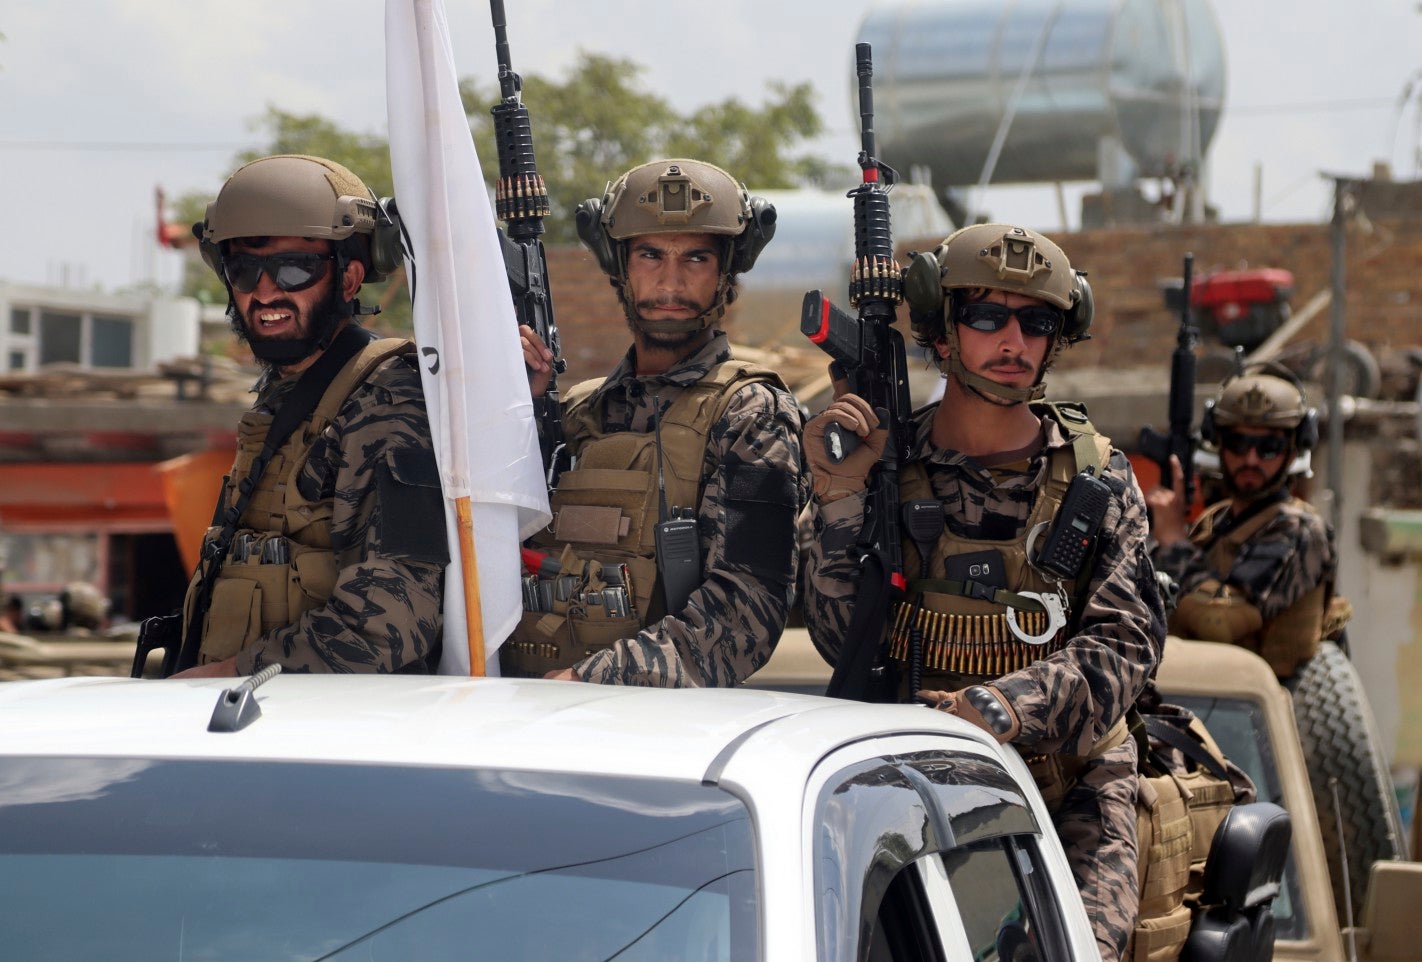 Taliban special force fighters arrive inside the Hamid Karzai International Airport after the US military’s withdrawal